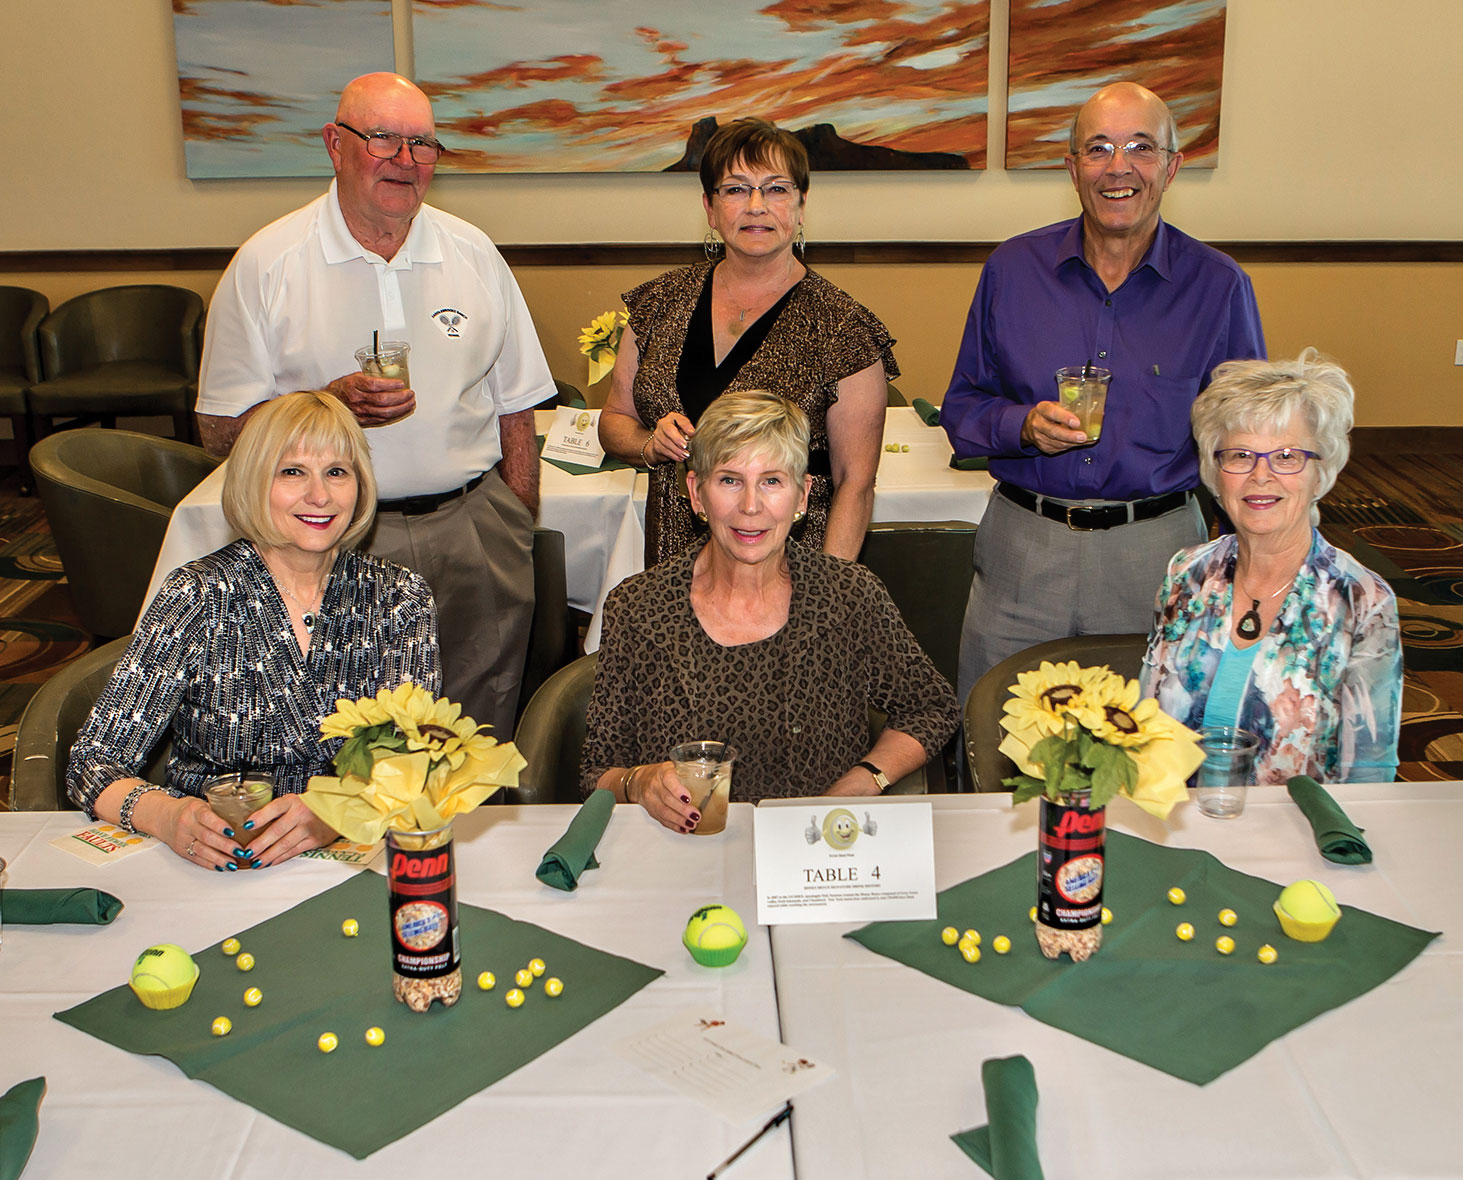 The annual dinner planning committee, front row: Jan Martin, Beena Ordahl, Sheila Bray (SBRTA Events Chair); back row: Dean Alfrey, Susan Engebertson and Alastair Stone